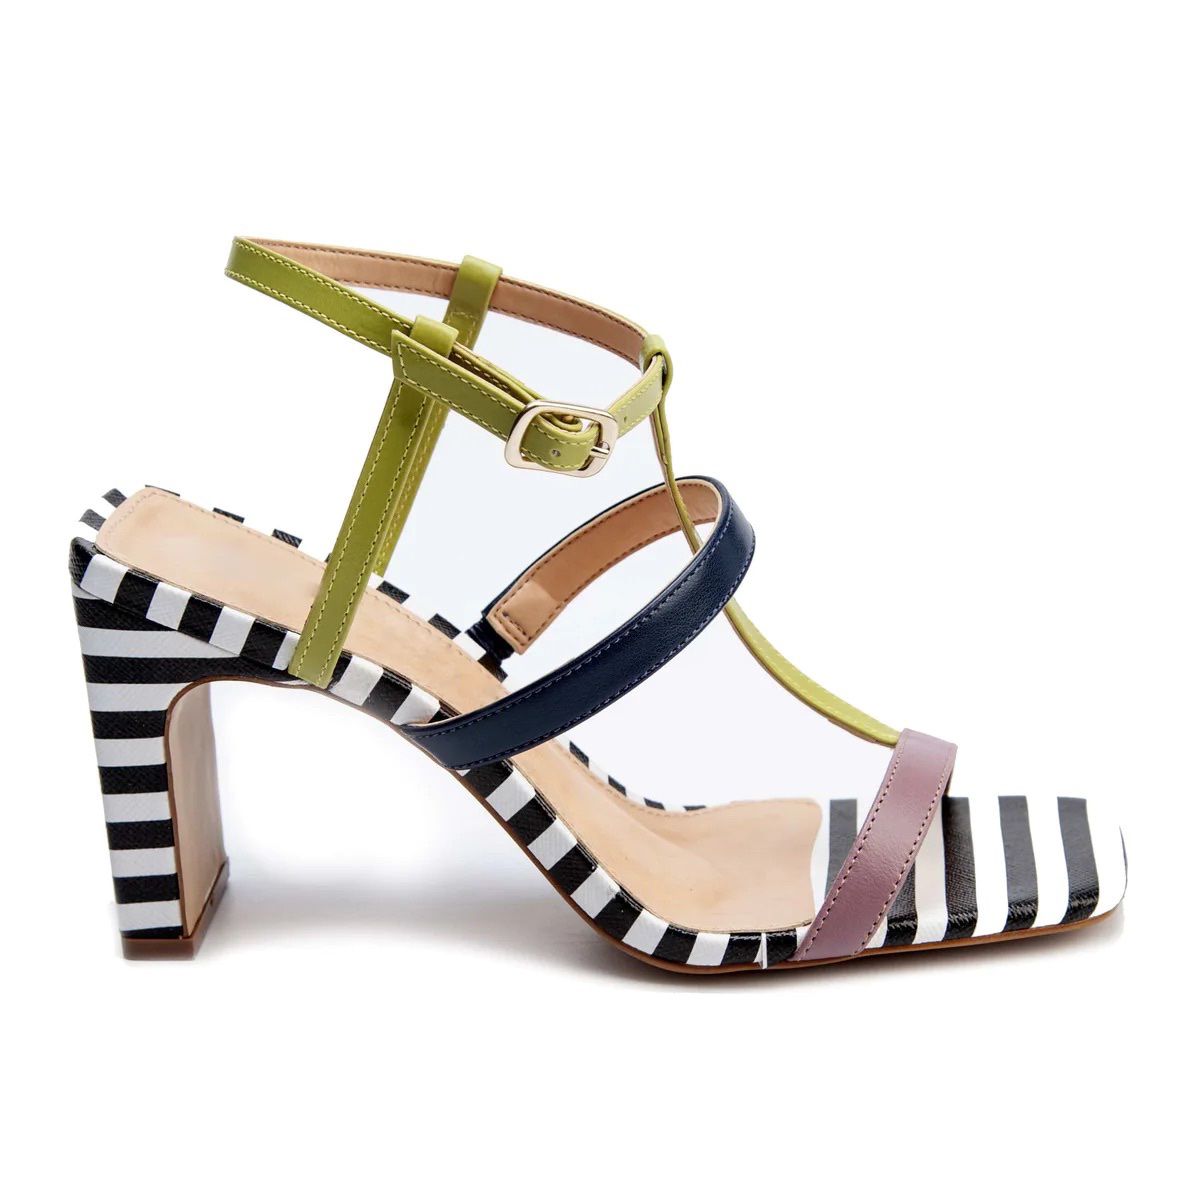 New Colorful Black White Strapped Comfortable Heels